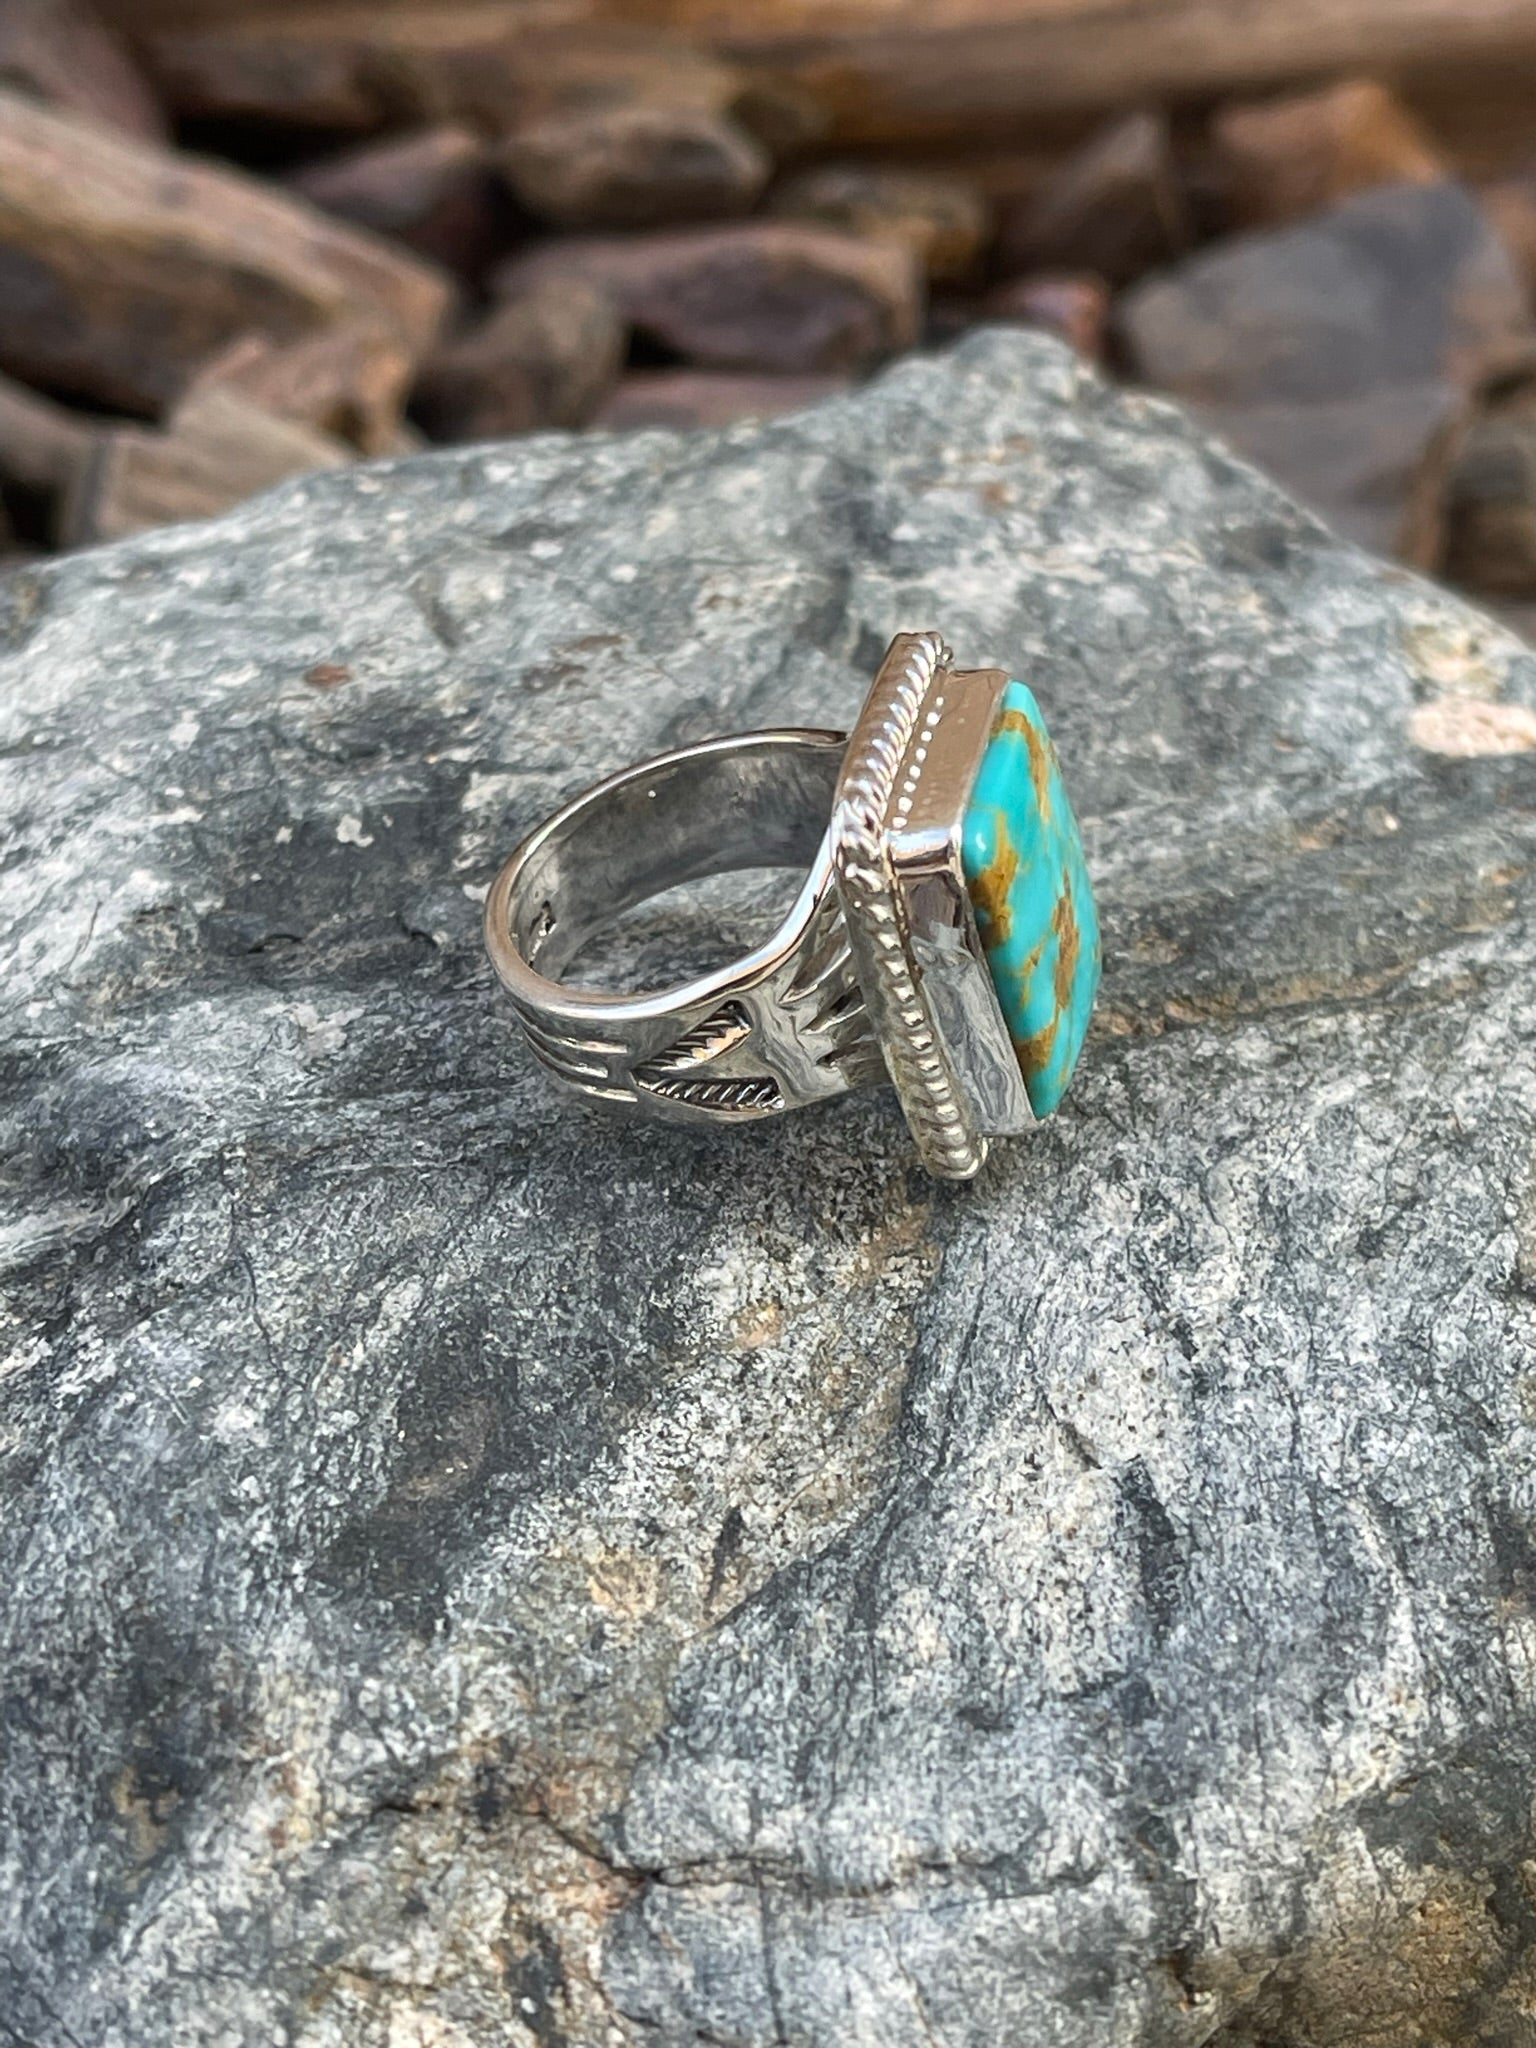 Square Cut Sterling Silver Kingman Turquoise Ring with Twist Trim - Size 6 1/2